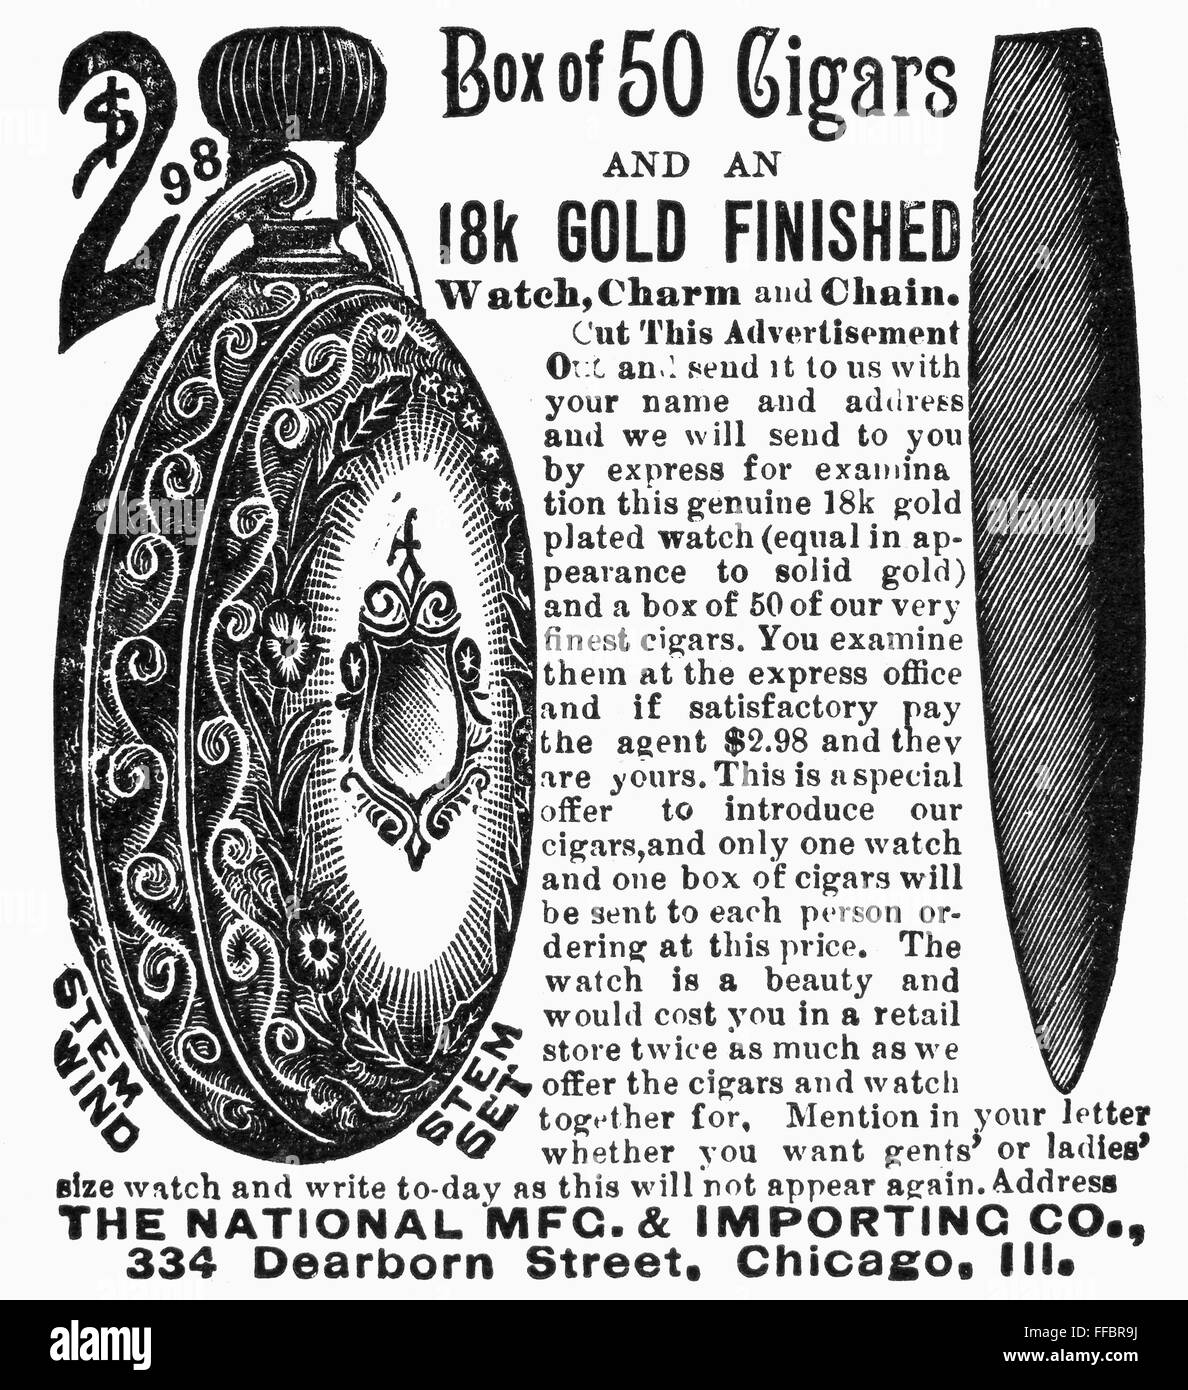 CIGAR AND WATCH AD, 1893. /nAdvertisement for a gold finished watch and a box of cigars from an American magazine, 1893. Stock Photo